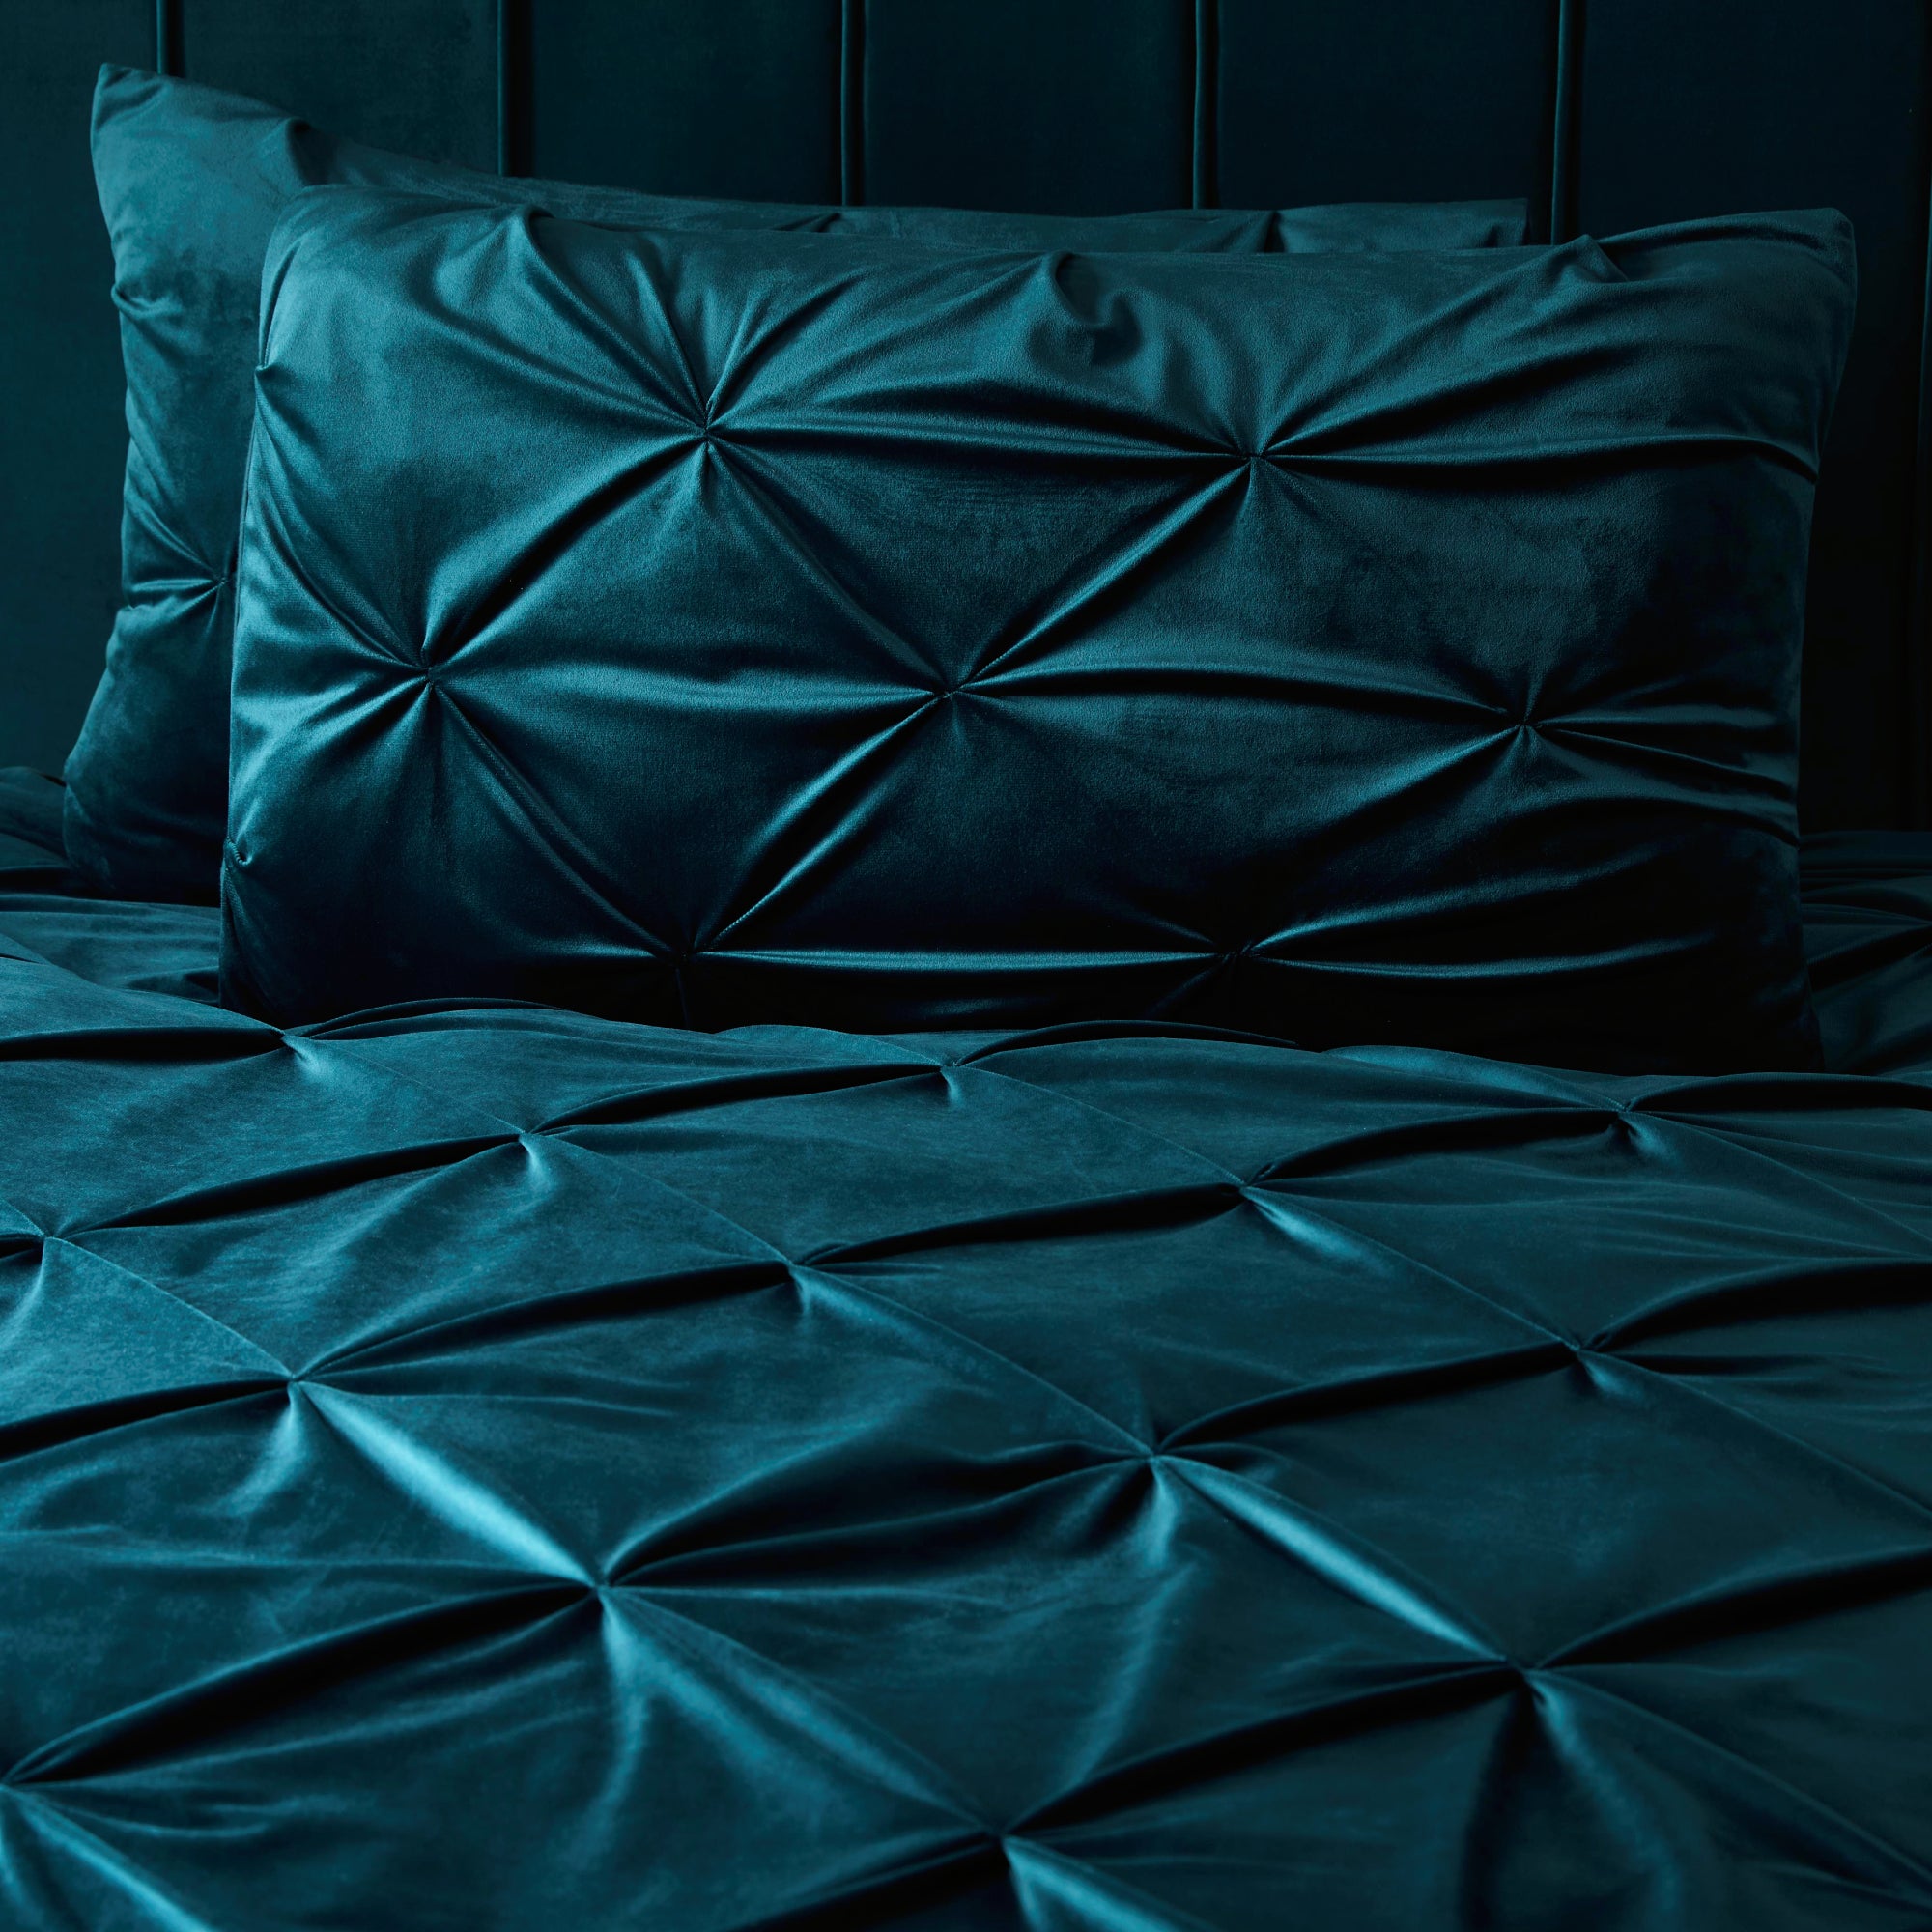 Duvet Cover Set Mira by Soiree in Teal